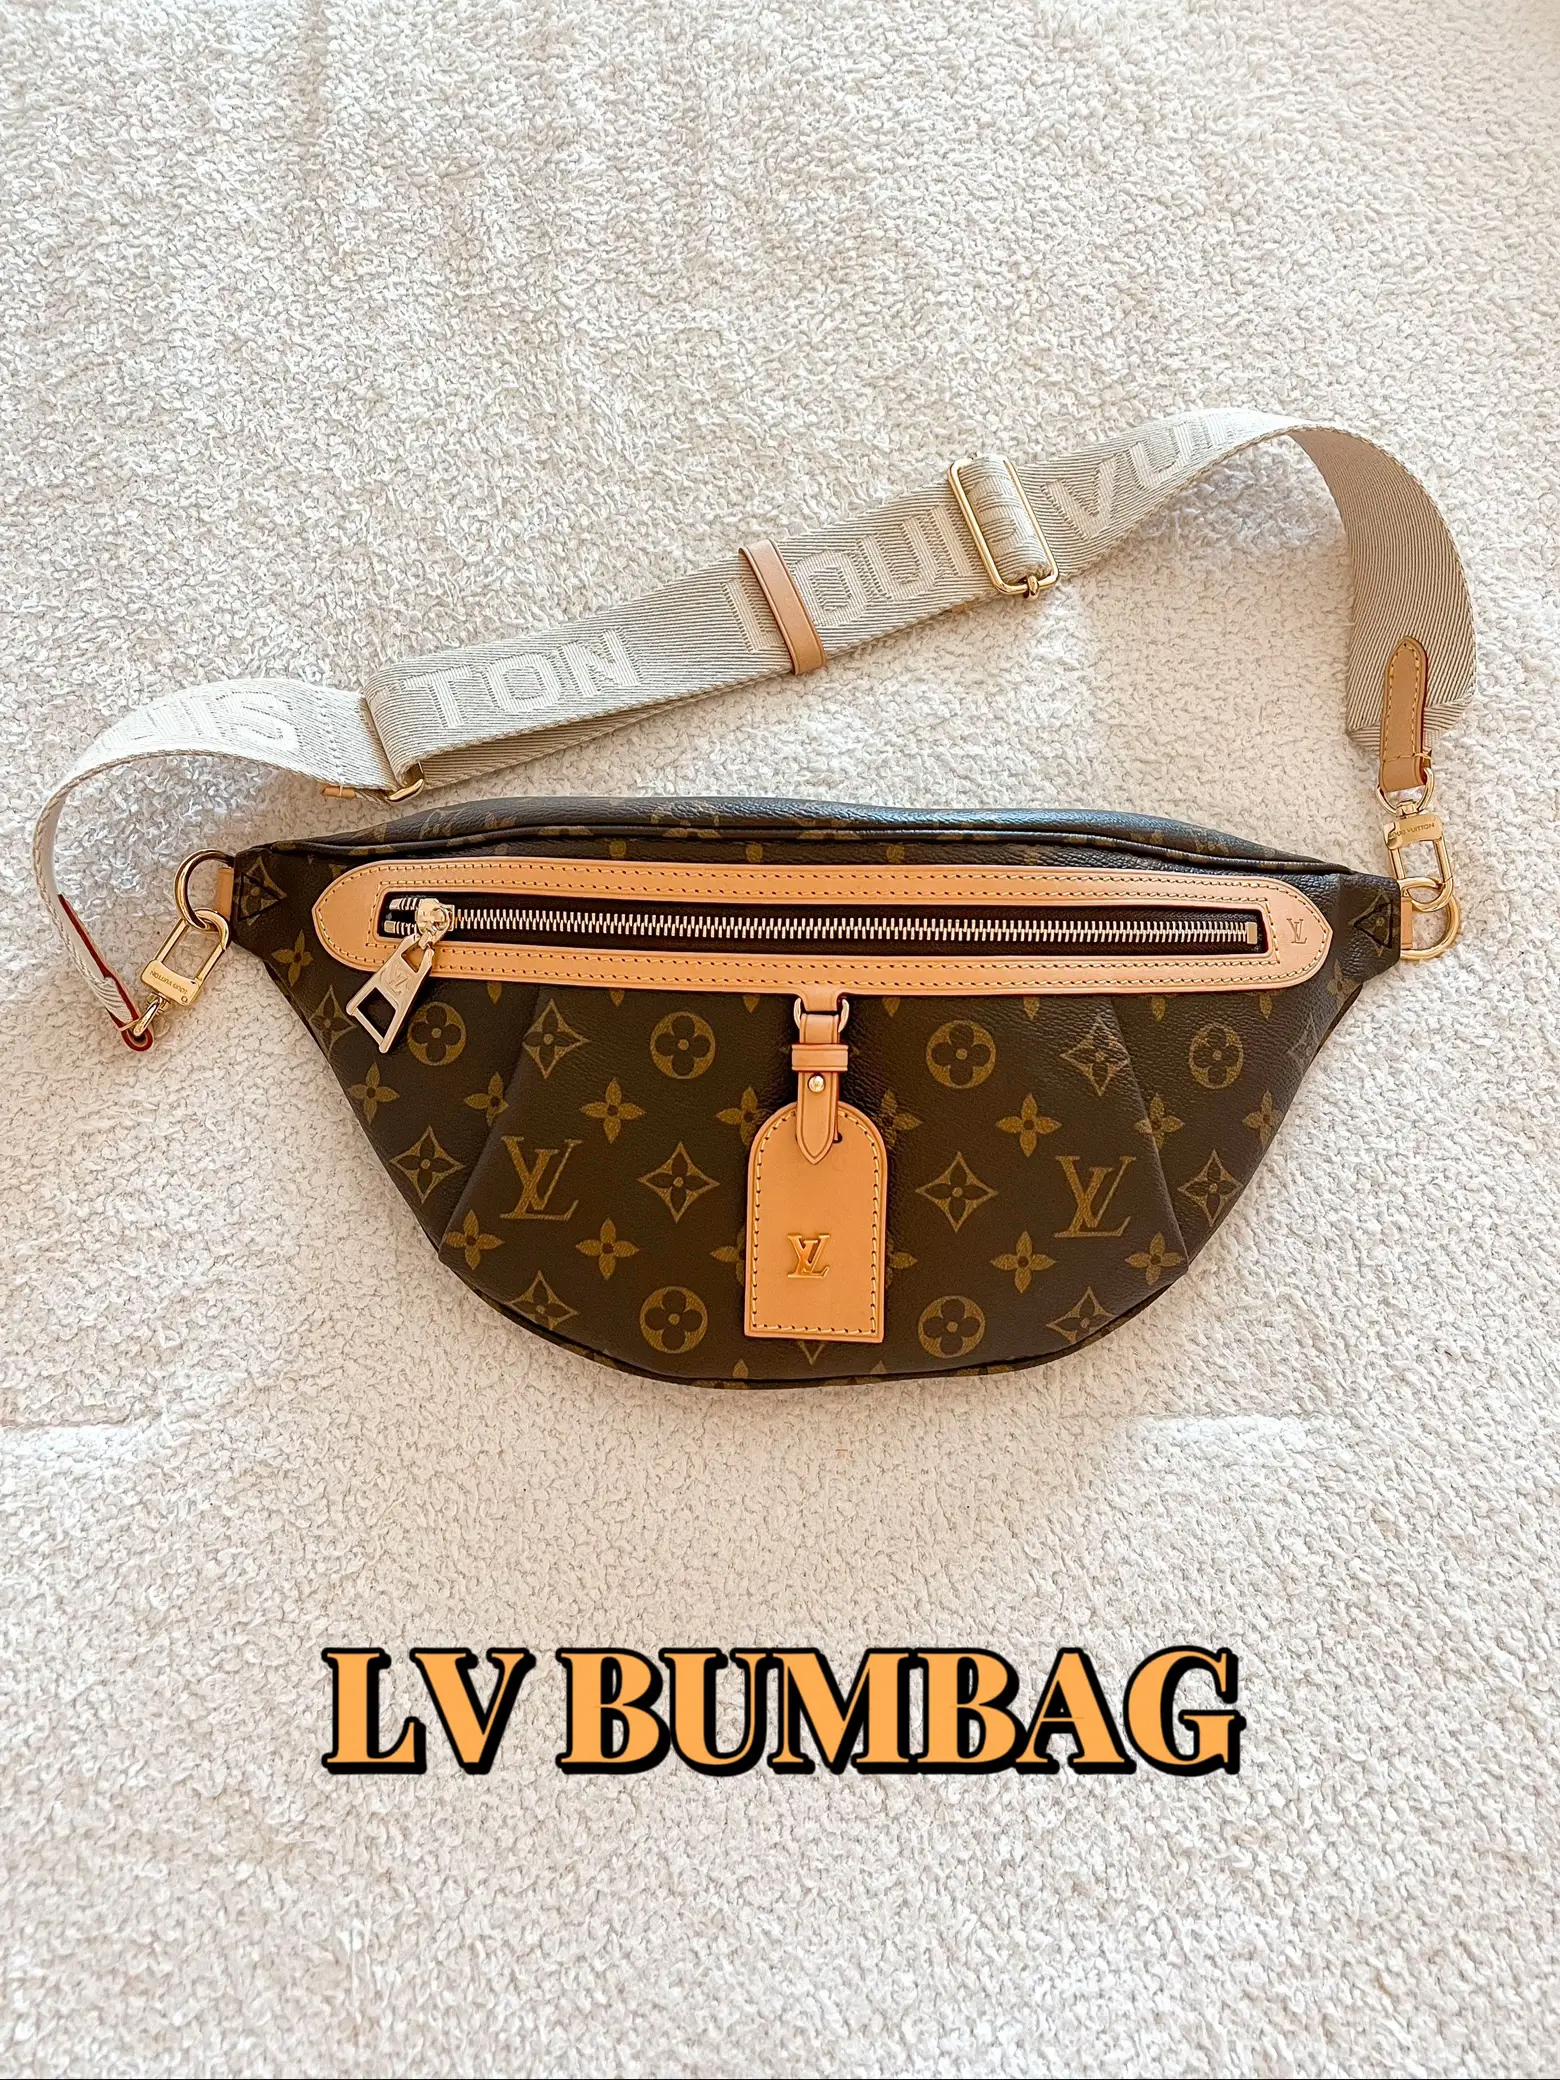 LV BUMBAG ✨, Gallery posted by Everyday_tina